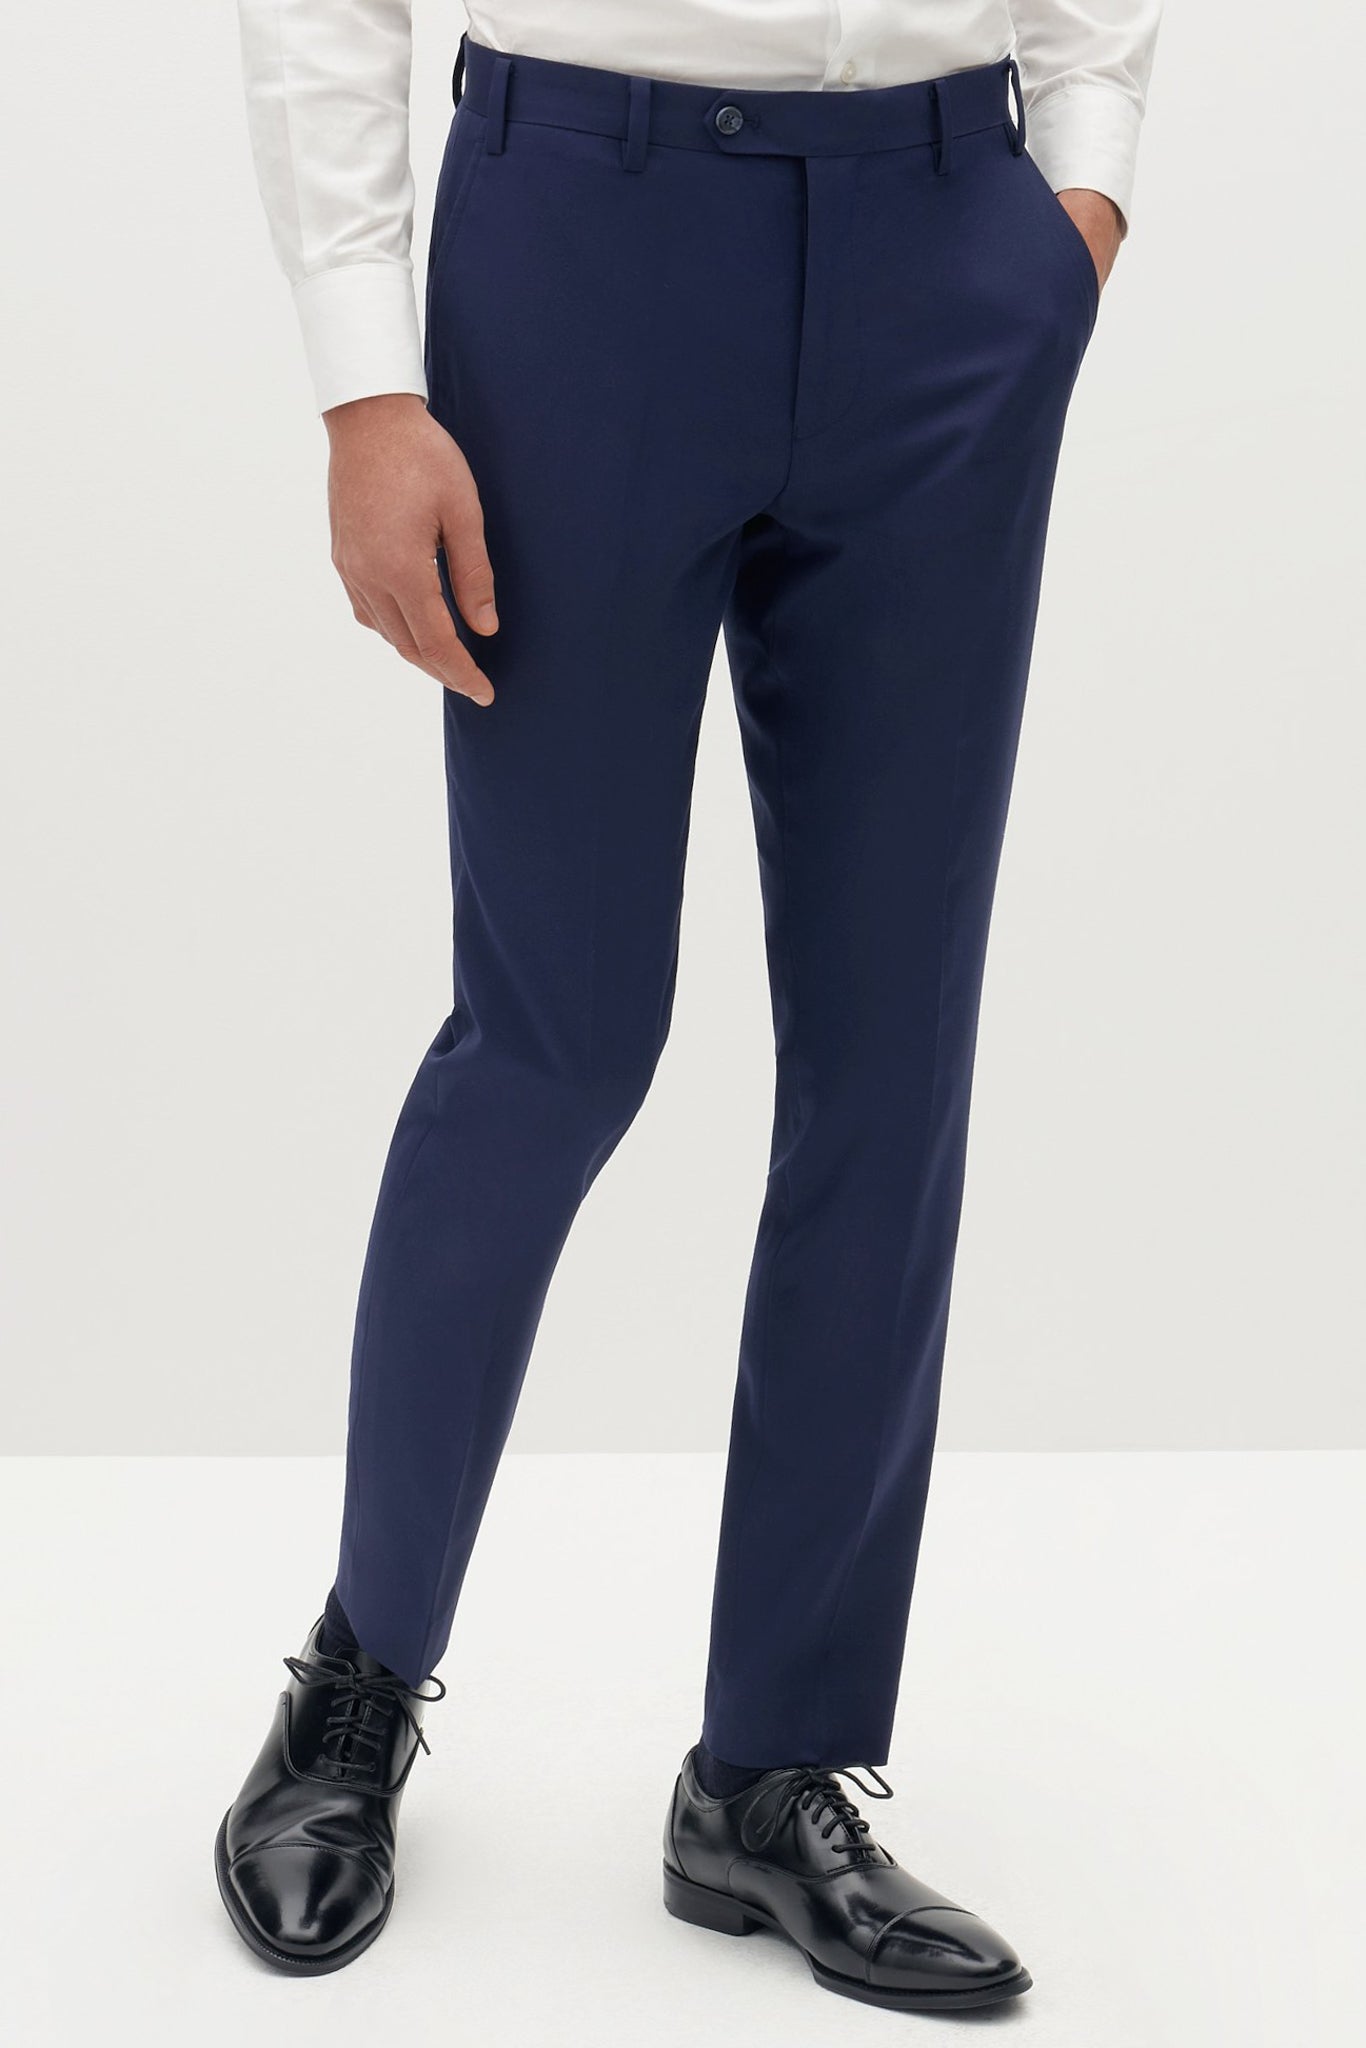 Mens Navy Blue Formal Trousers at Rs 350 in Delhi | ID: 12719969530